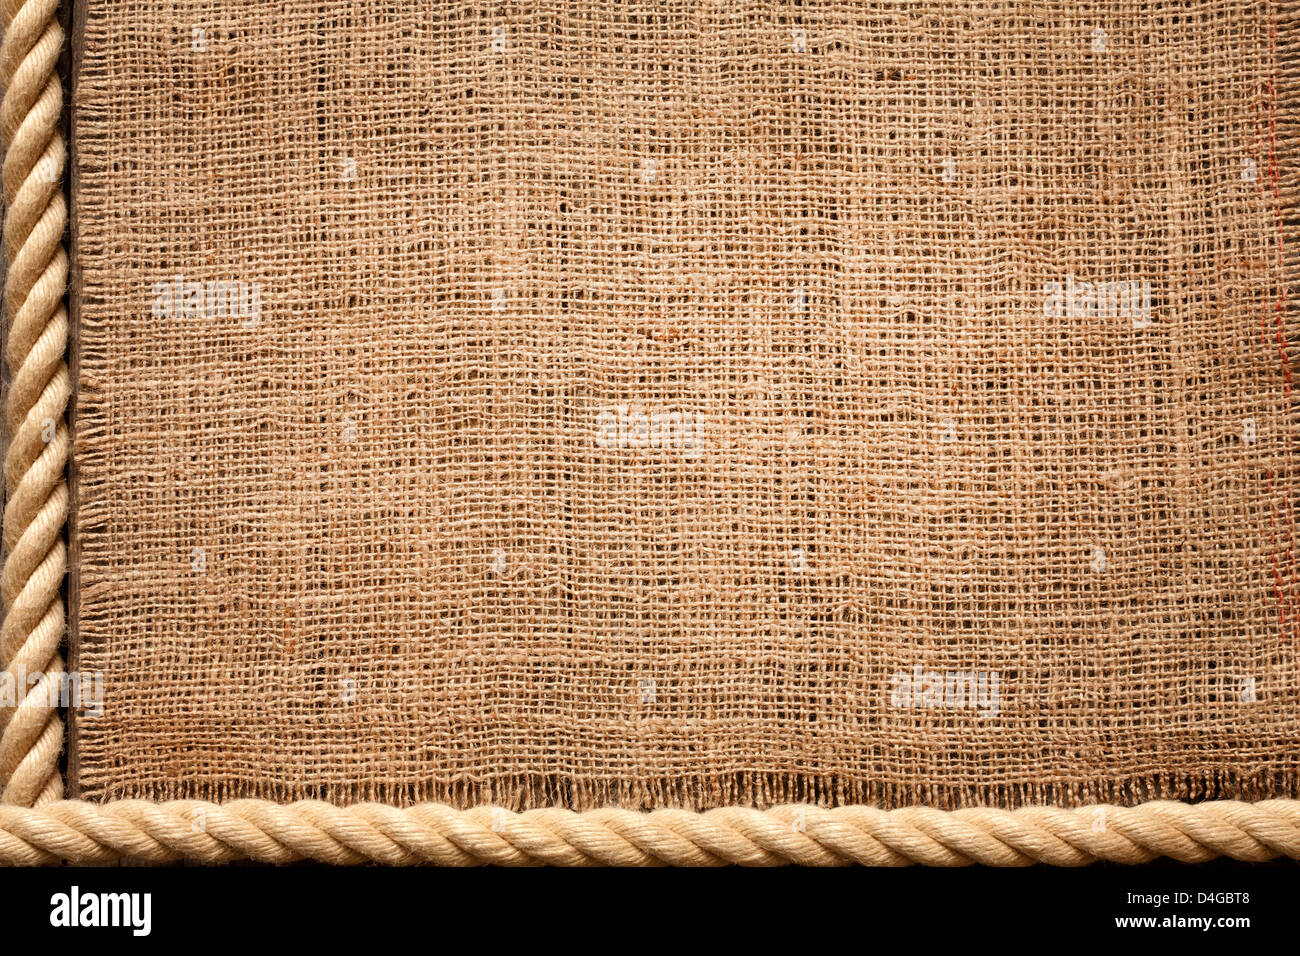 Rope and jute old vintage background concept on boards Stock Photo